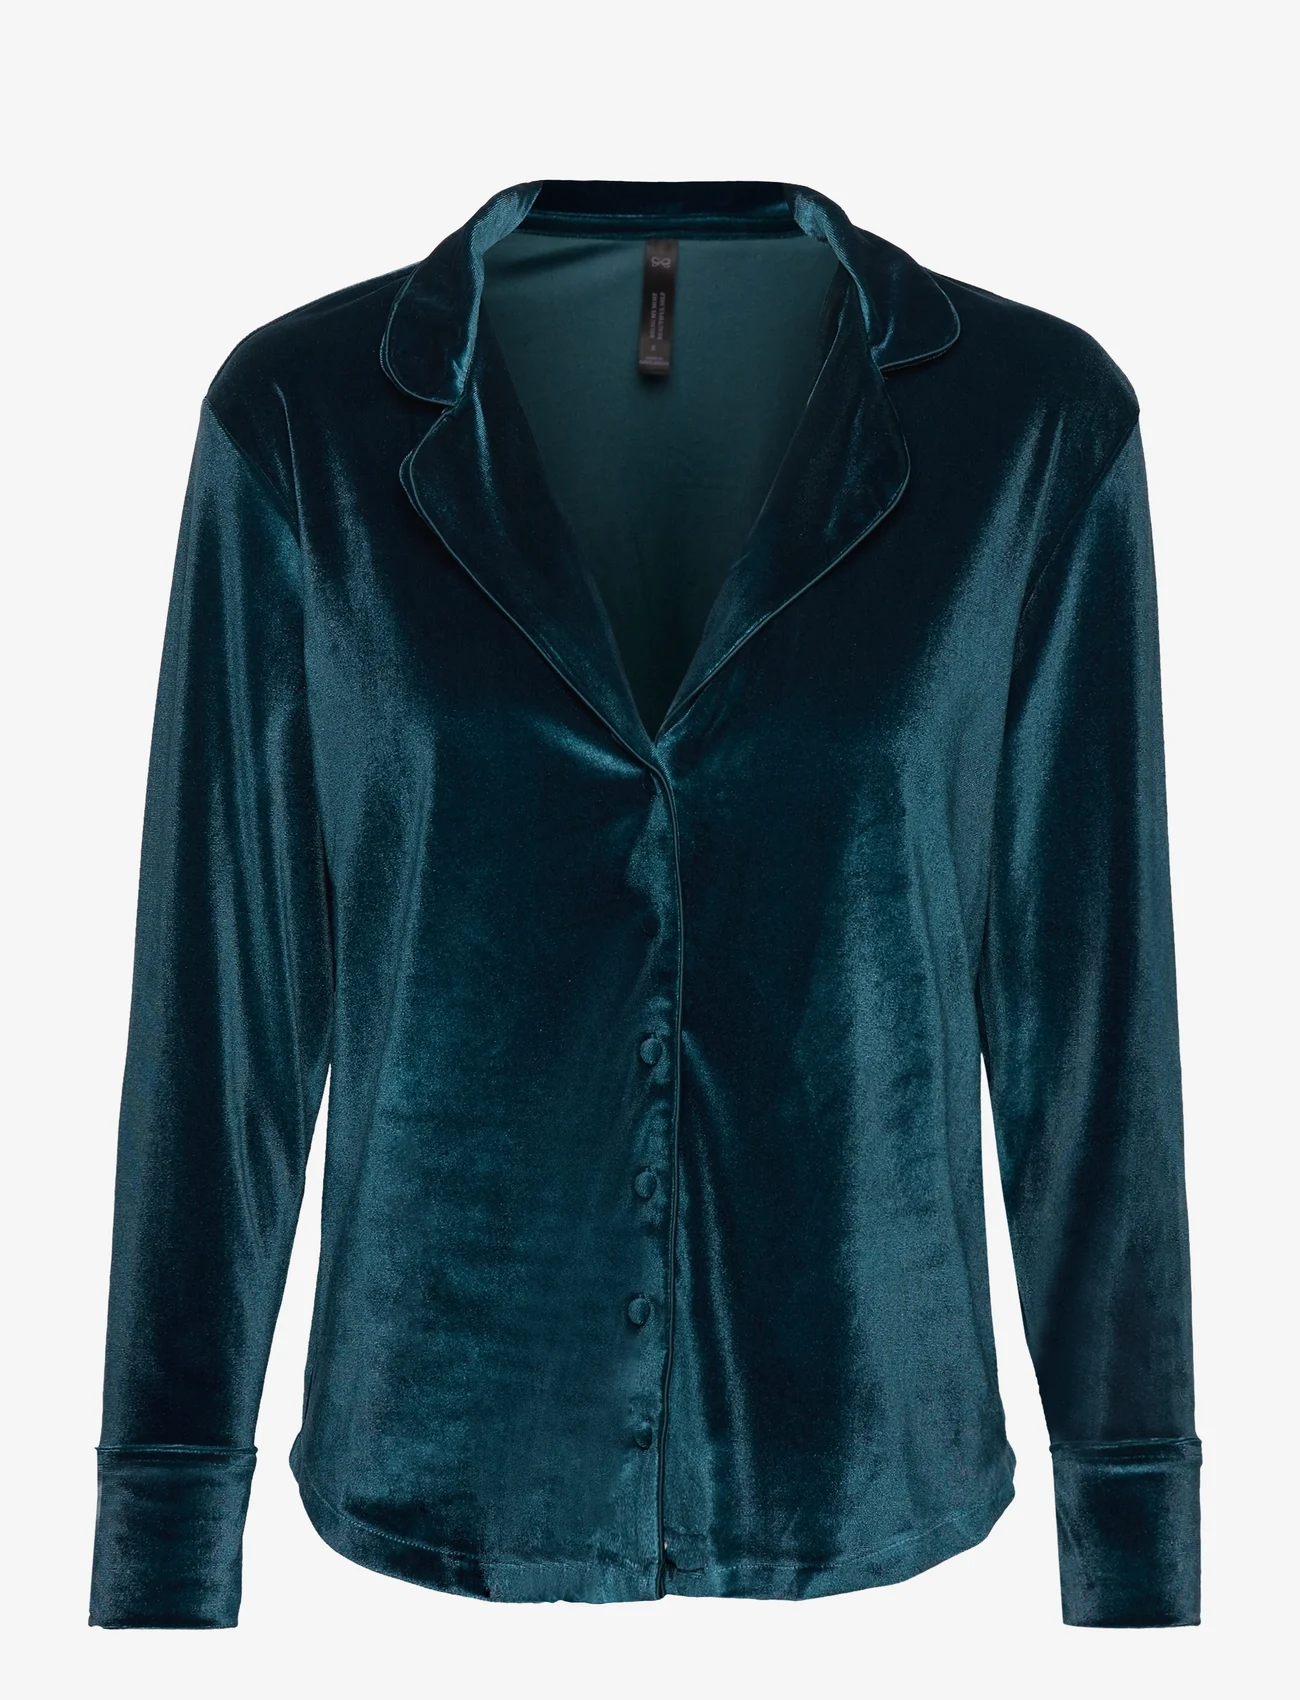 Hunkemöller - Jacket LS Shiny Velours Piping - lowest prices - reflecting pond - 0